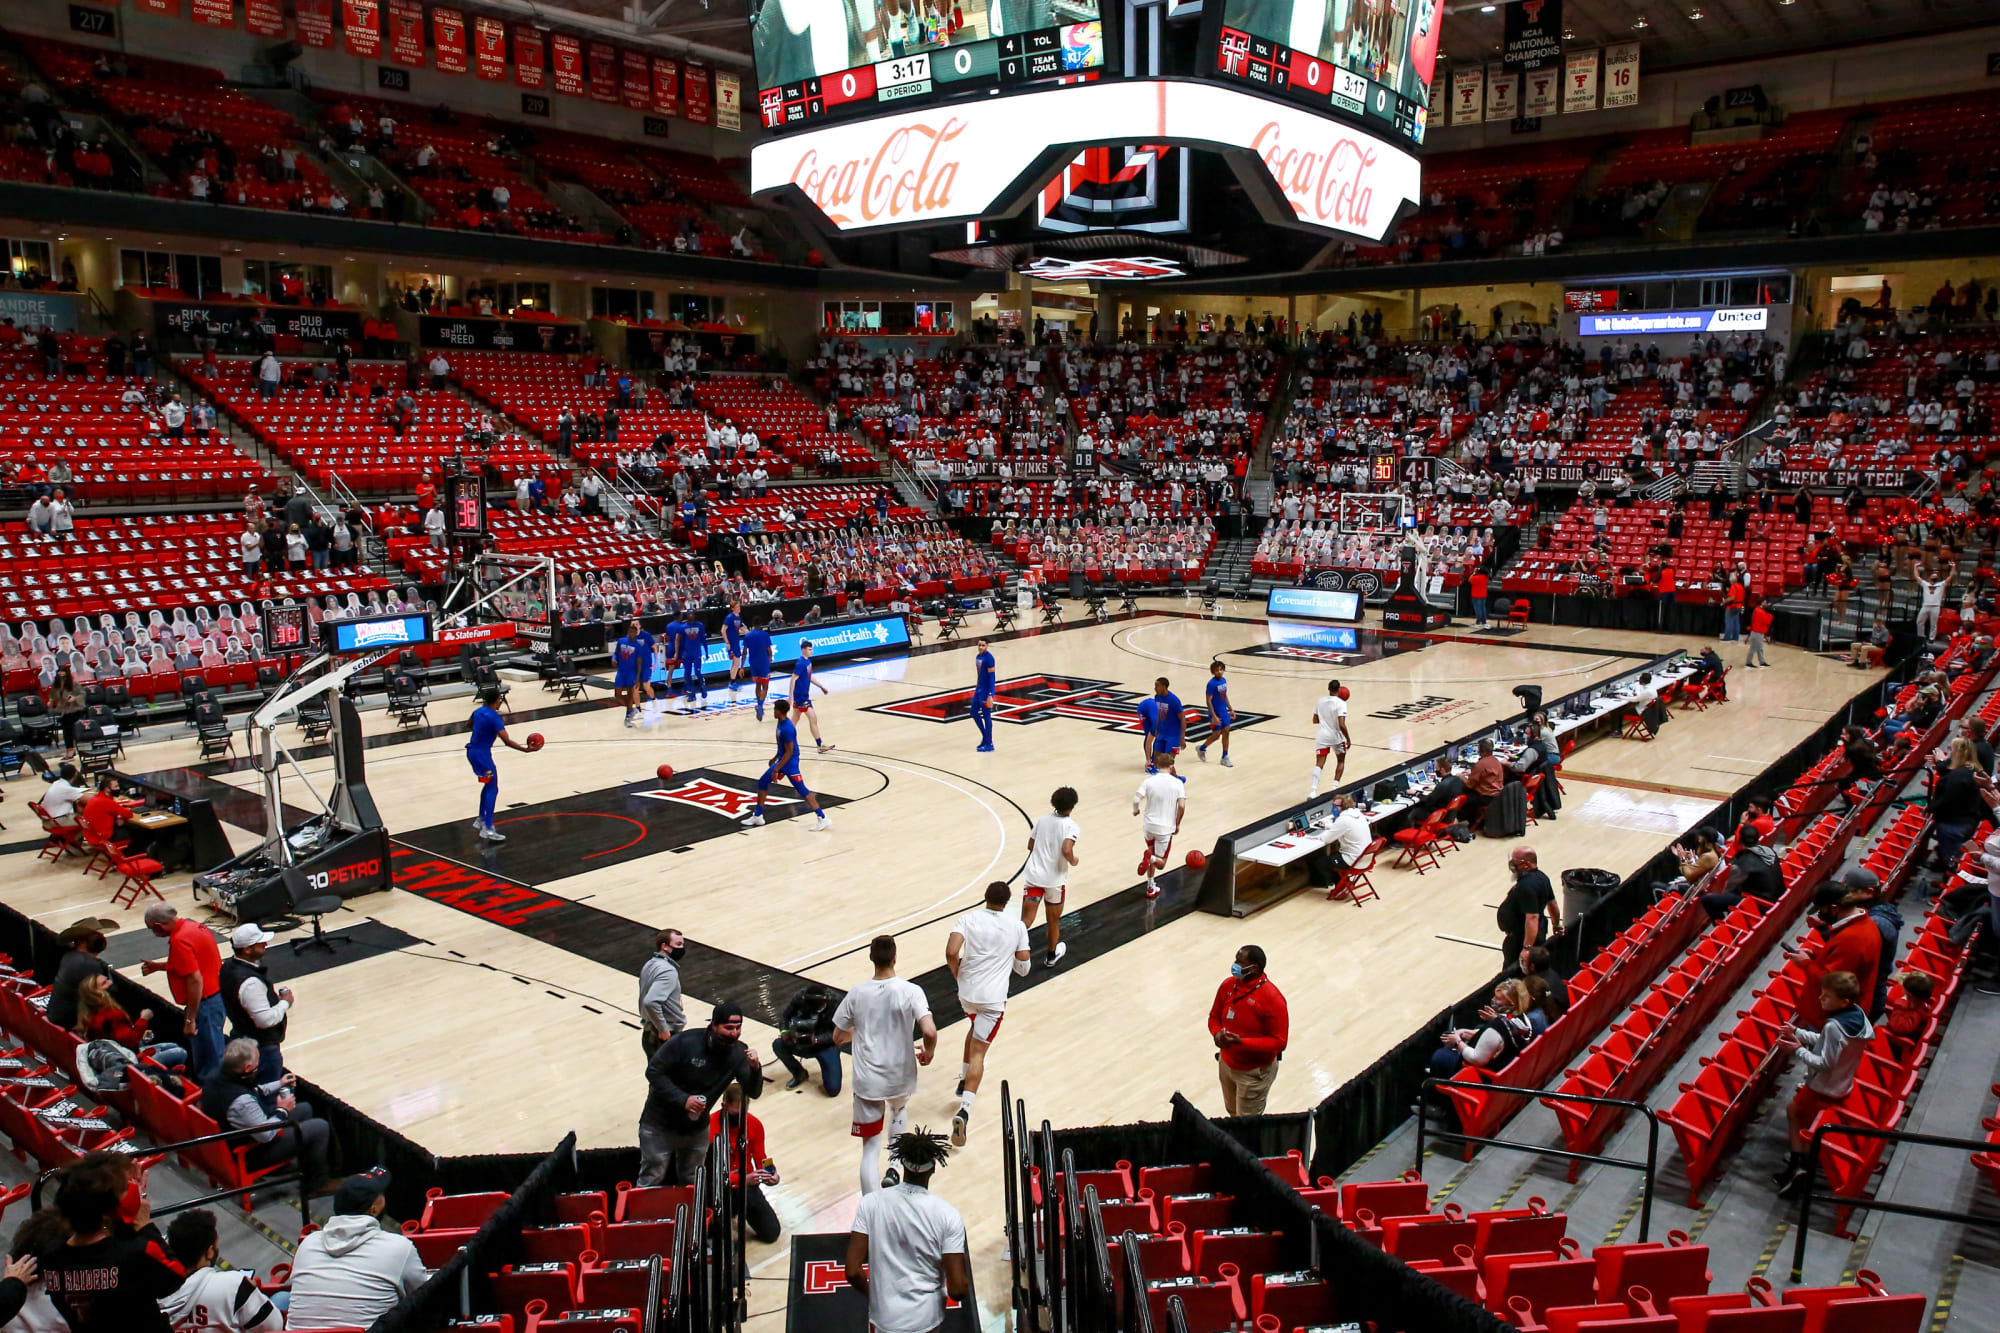 Texas Tech basketball: What we know about the Red Raiders so far